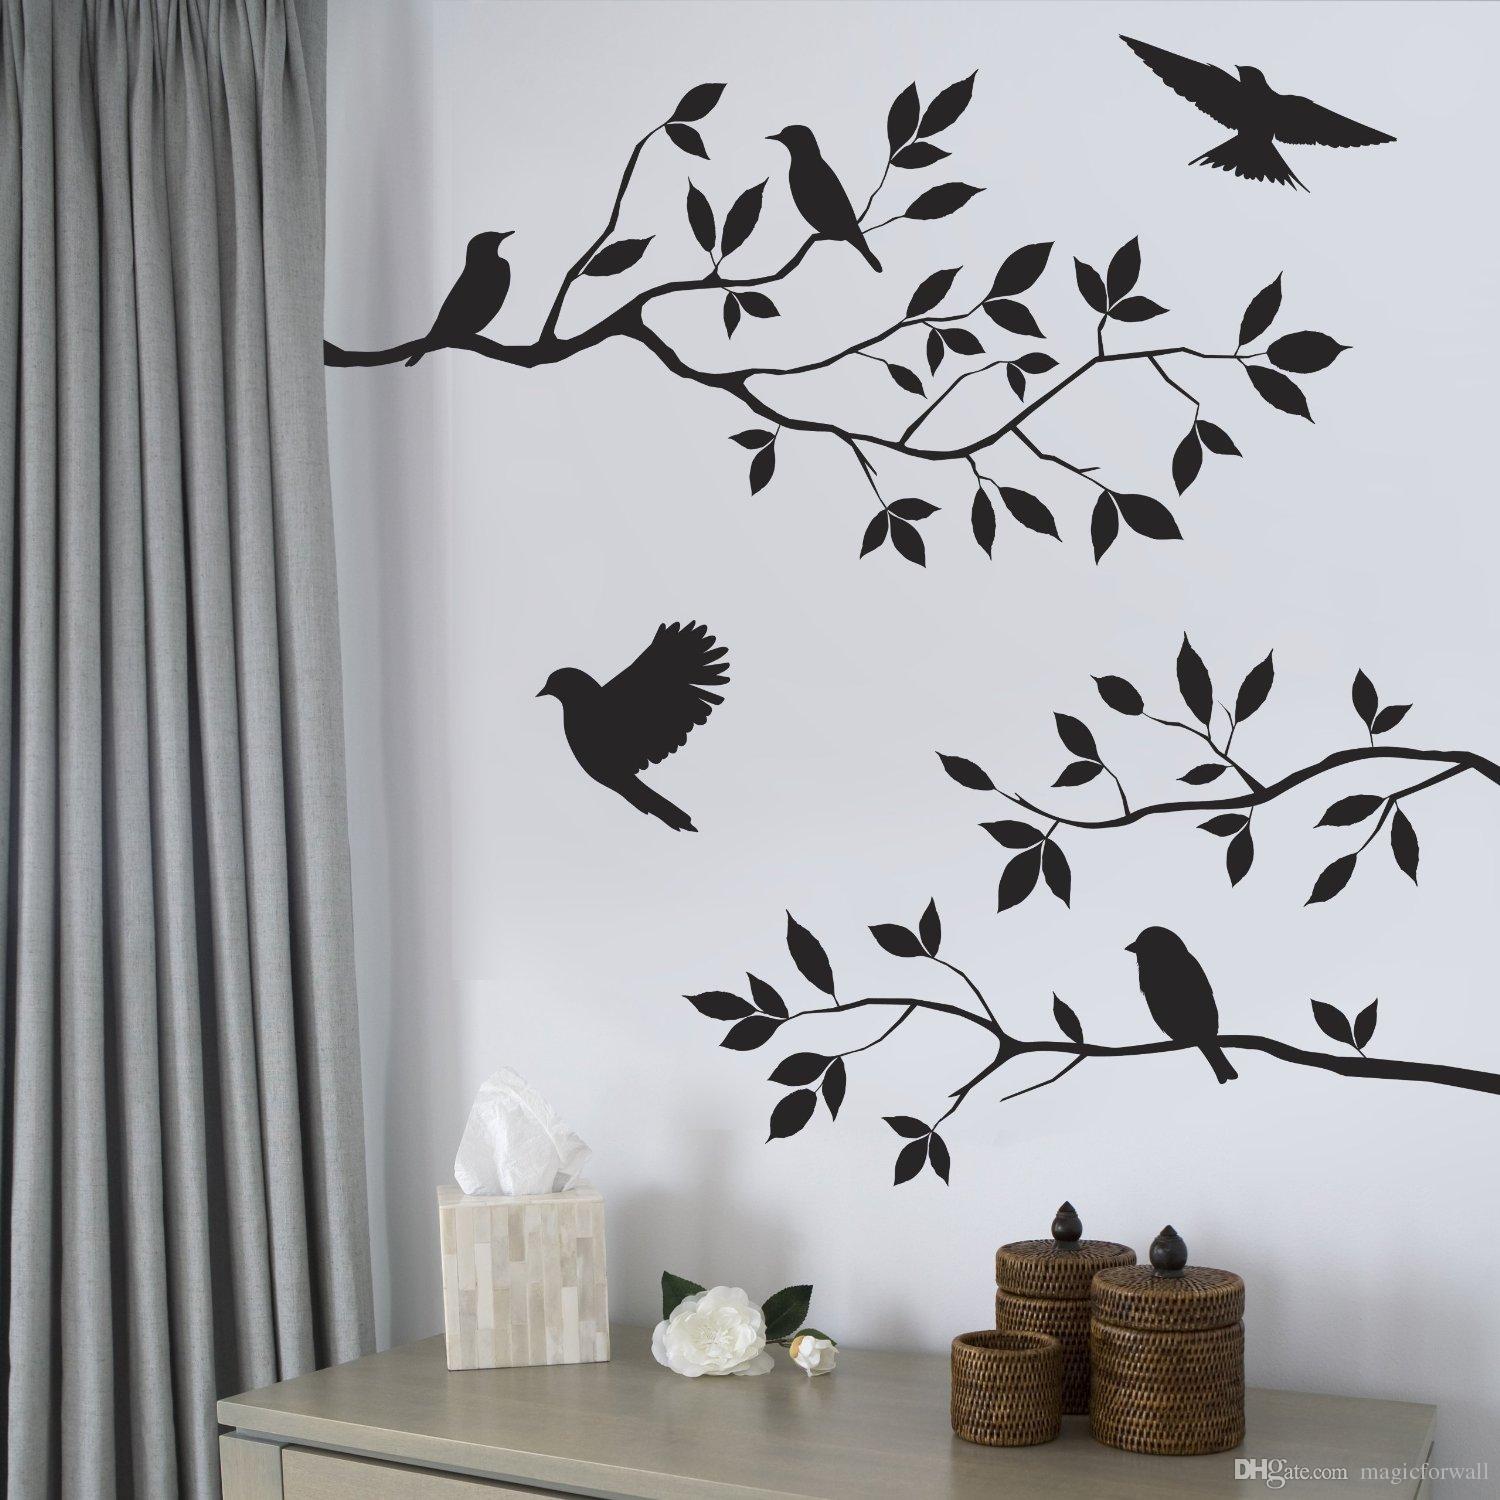 Black Bird And Tree Branch Leaves Wall Sticker Decal Removable Birds ...